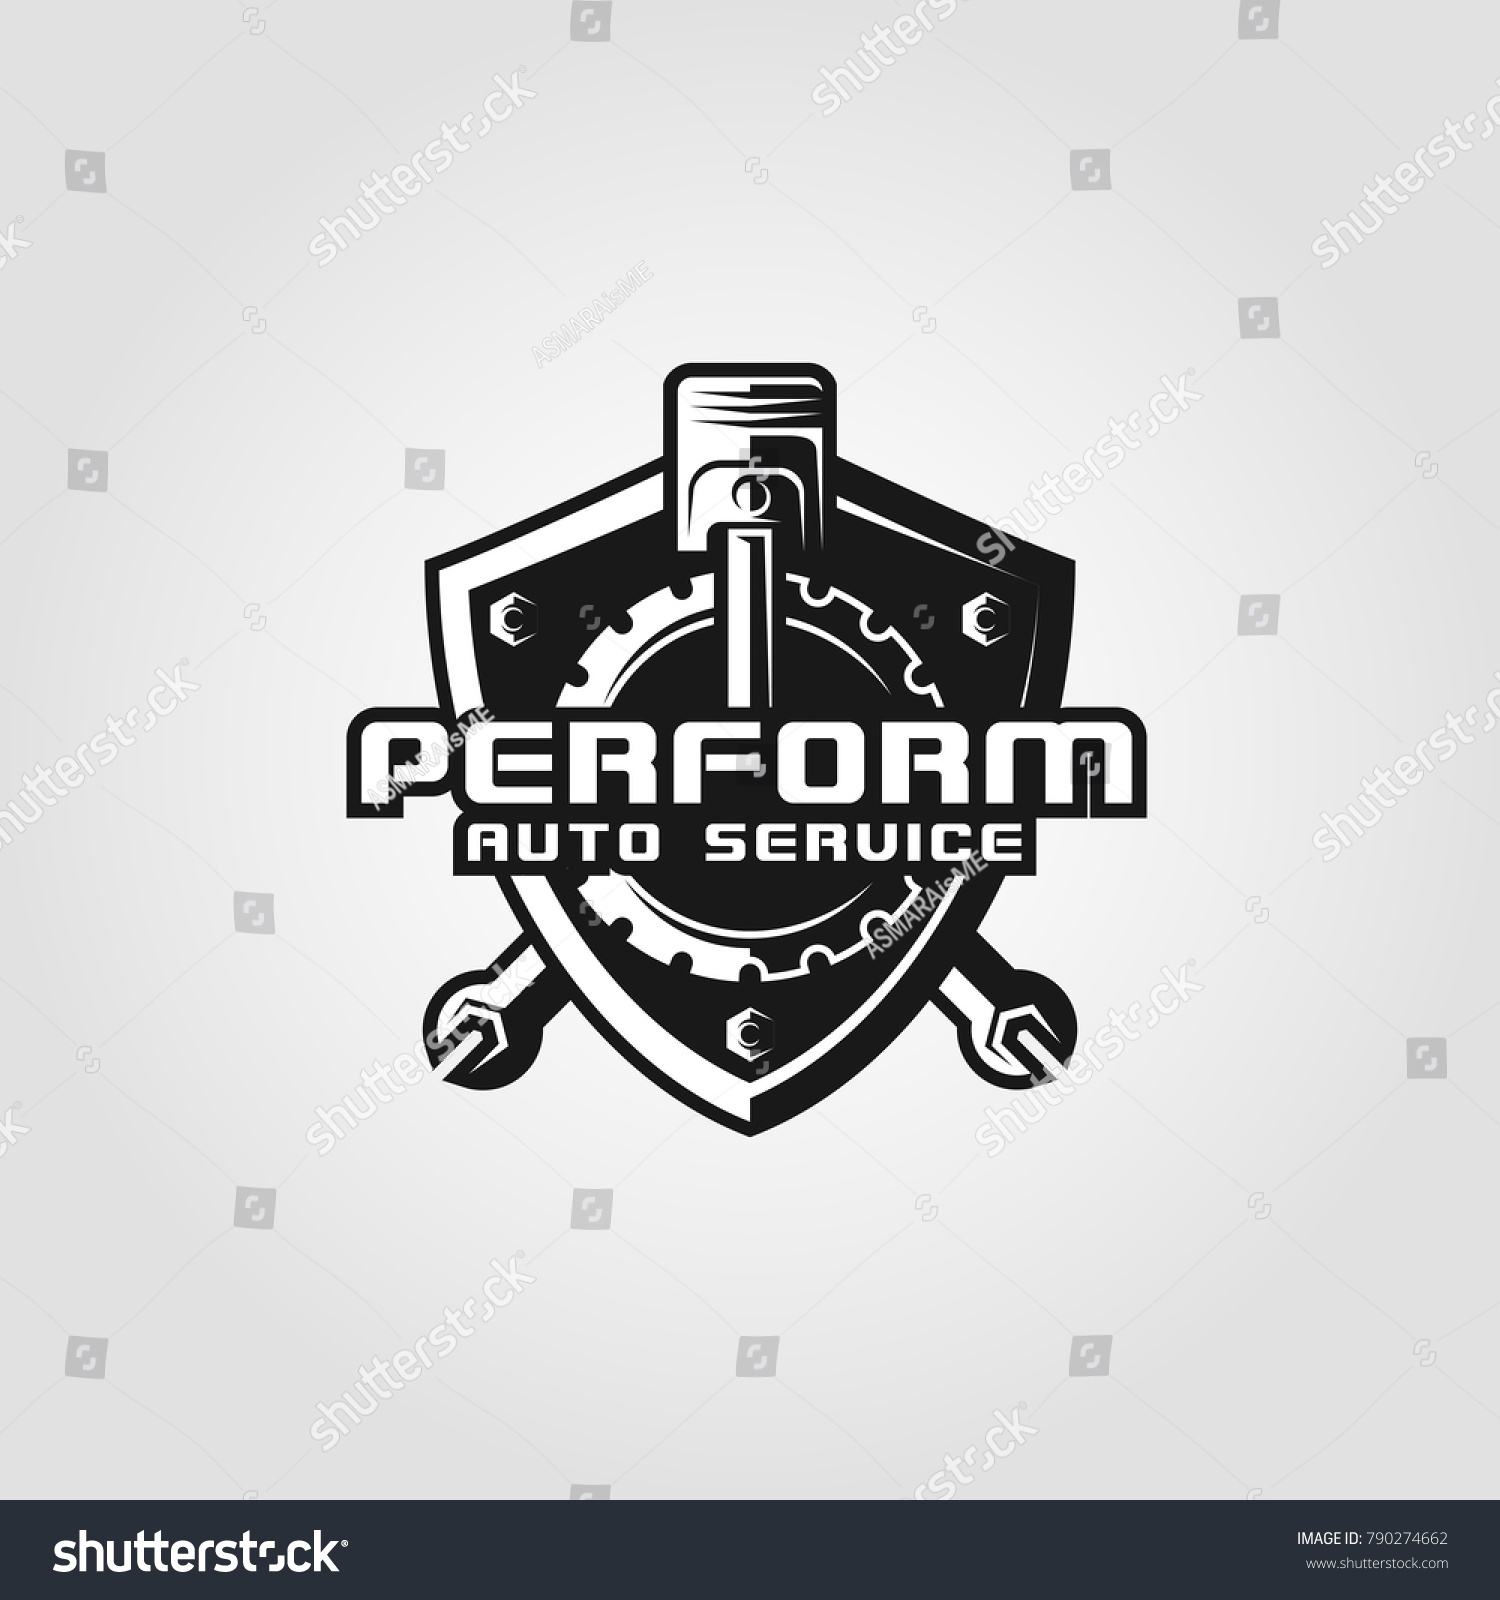 SVG of Perform is an Automotive logo with strong shield concept & combining with auto spare part. This can be used by company, auto workshop, expert mechanic, auto service, auto accessories, & many more svg